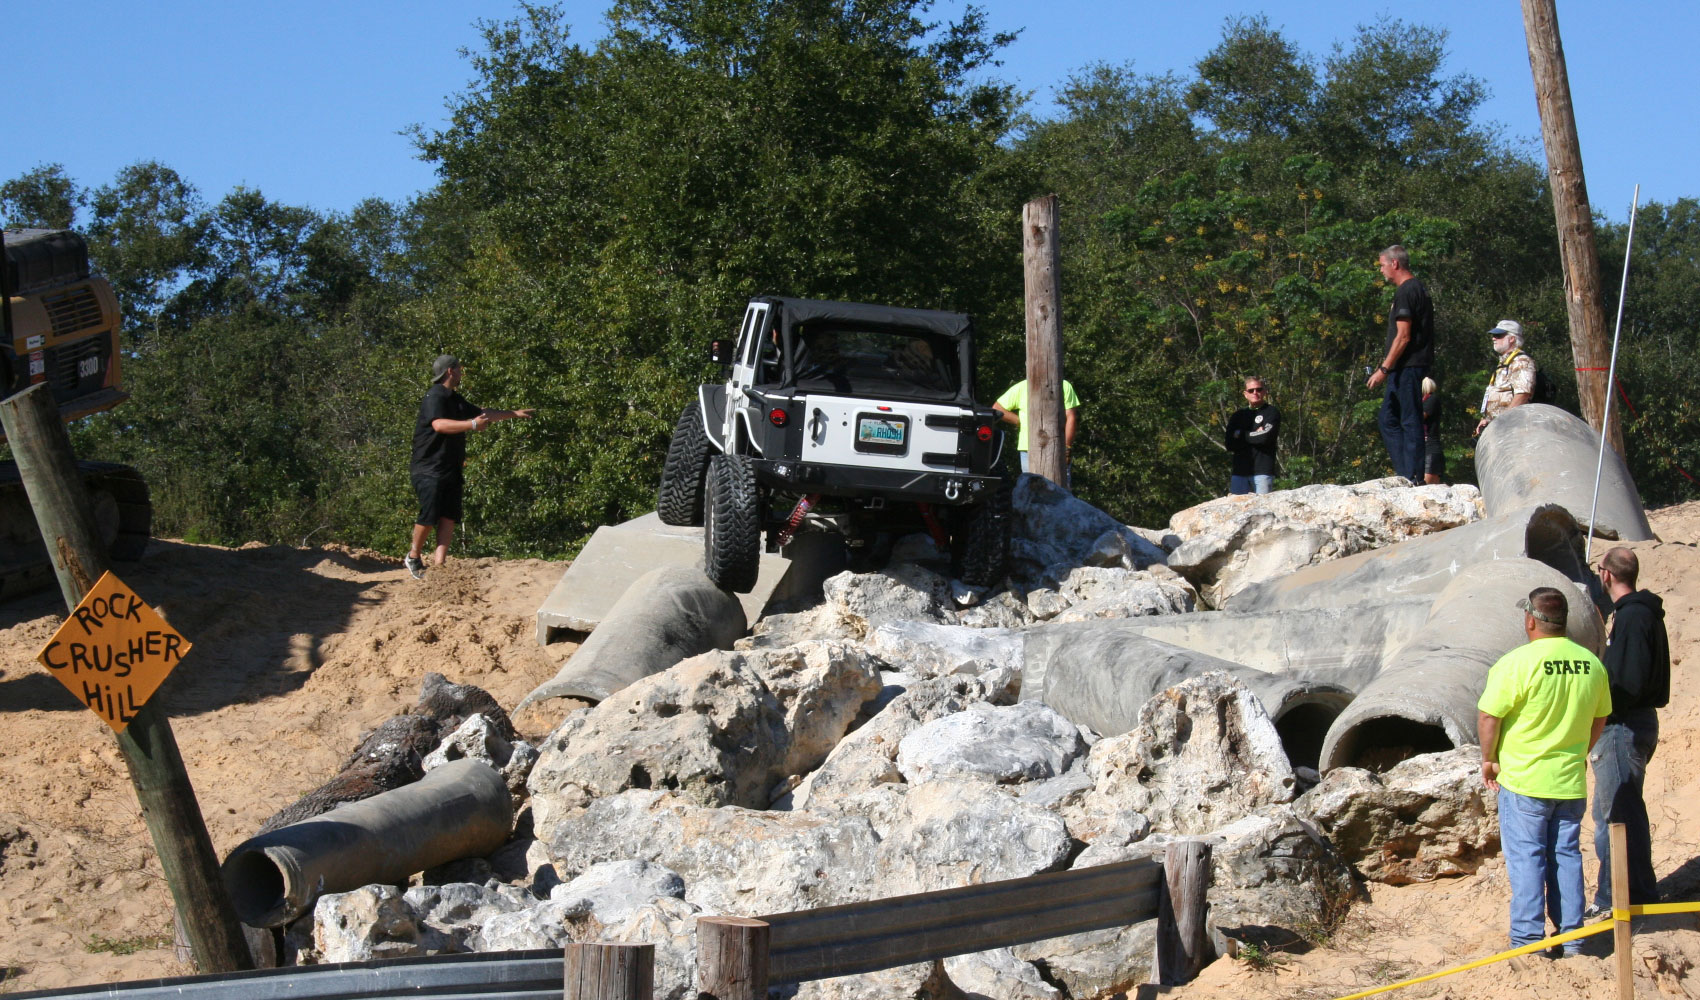 Rock crawling competition at 4WD.com 4WD Jamboree 2013 